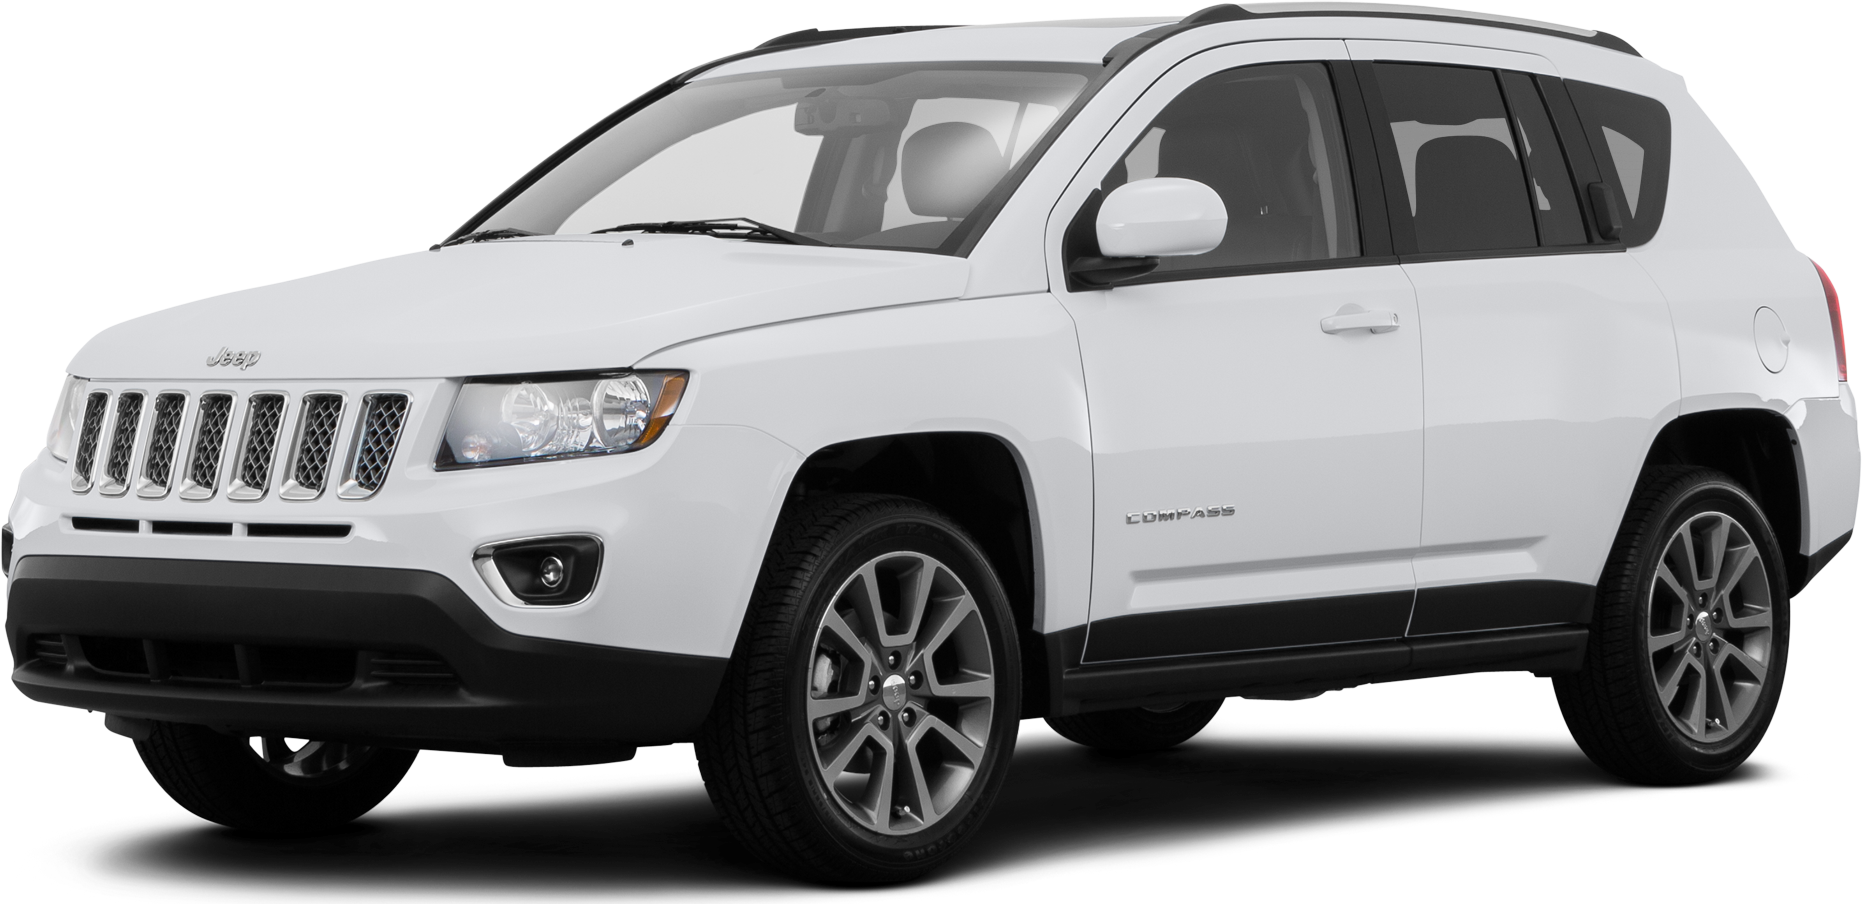 2016 Jeep Compass Price, Value, Ratings & Reviews | Kelley Blue Book